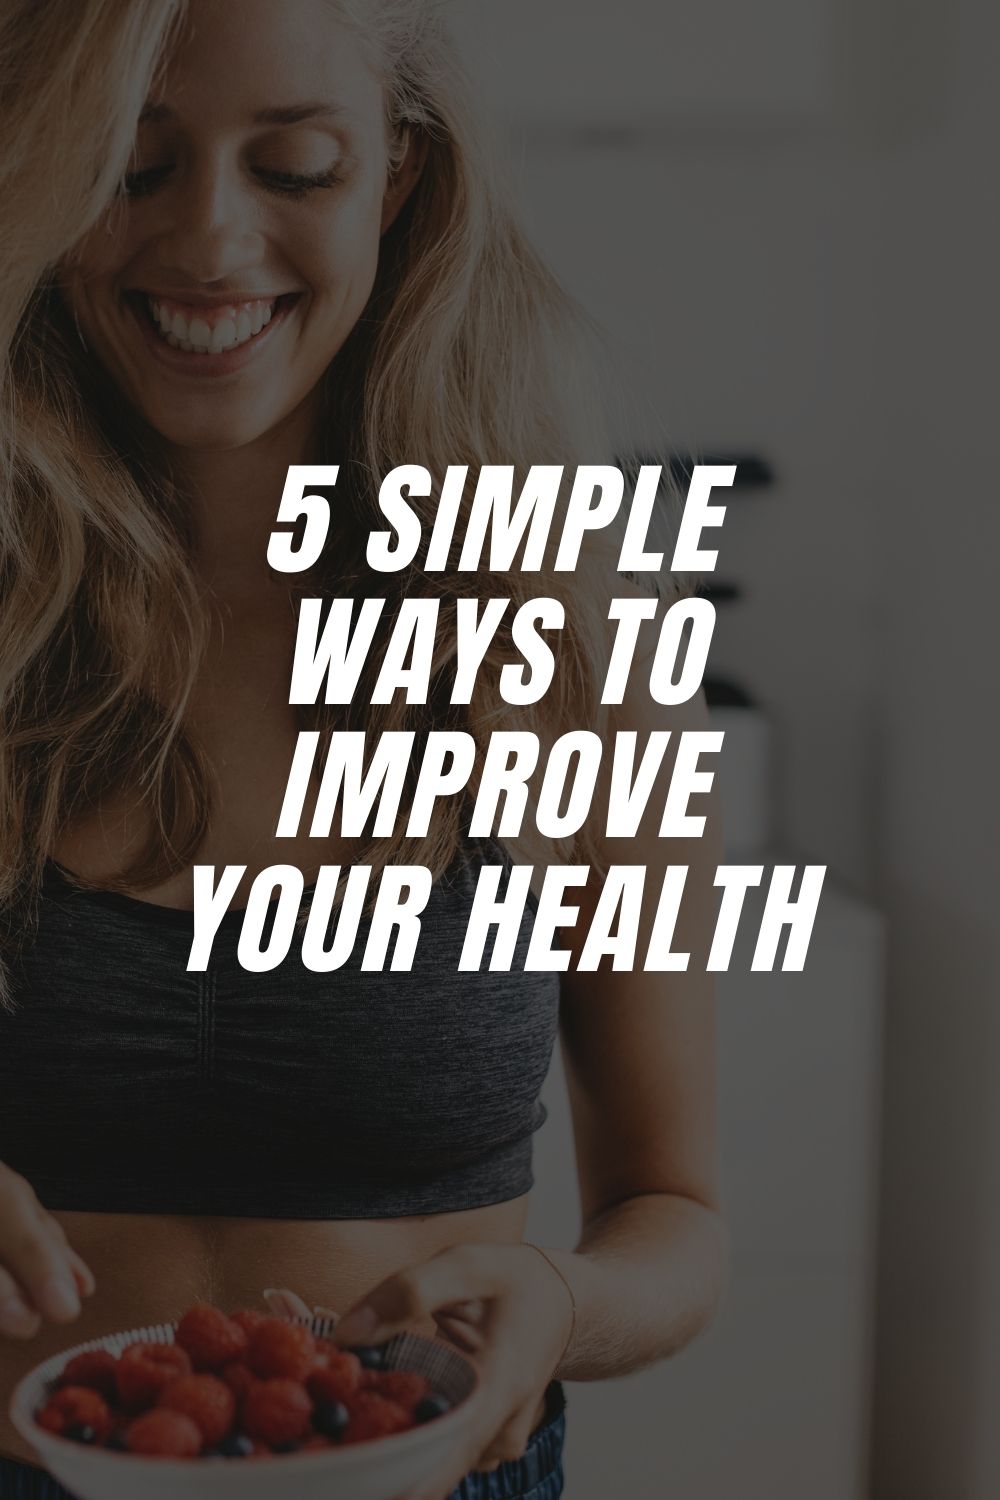 5 Simple Ways to Improve Your Health